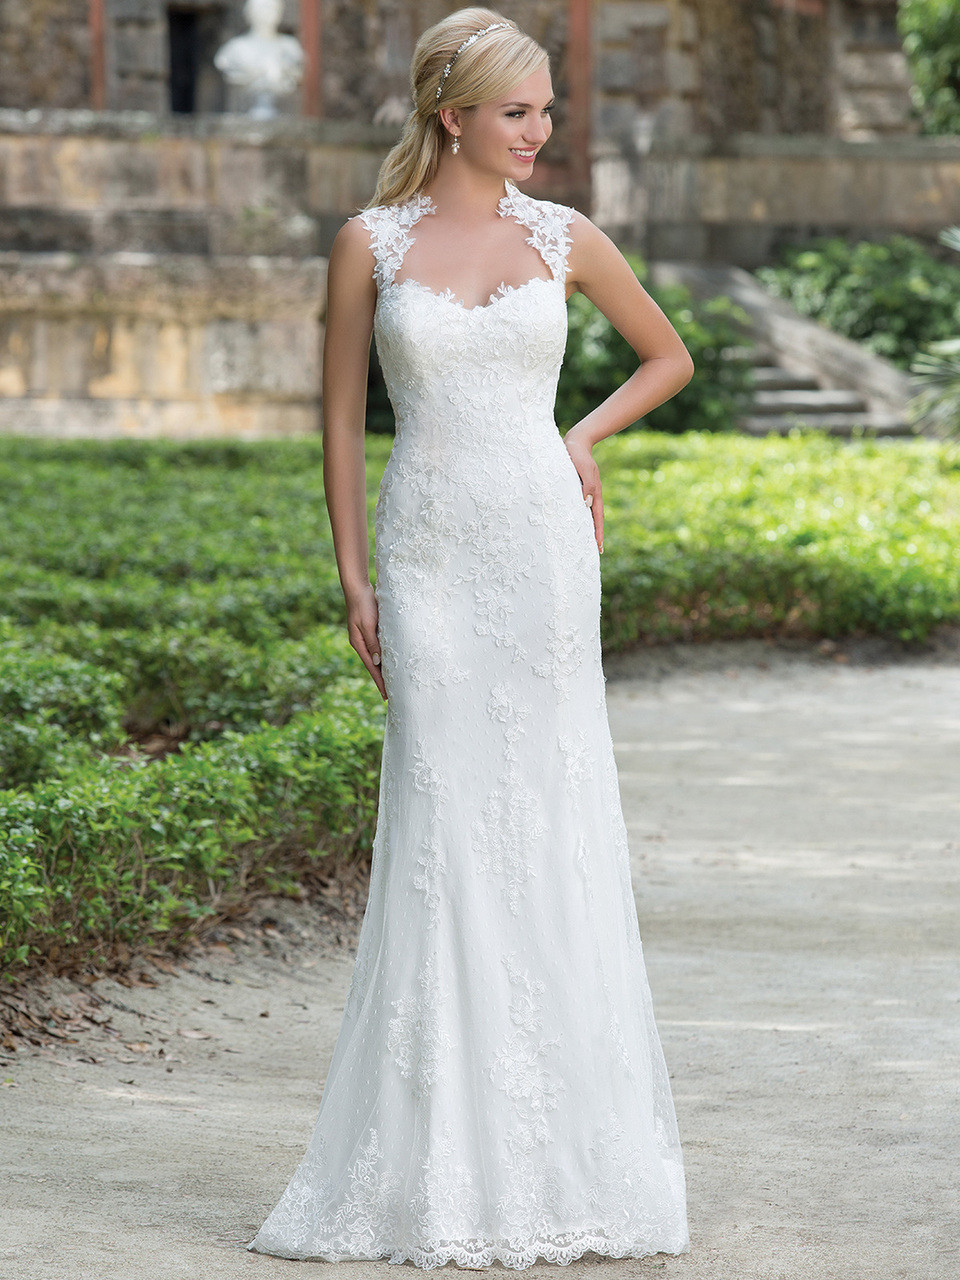 Sincerity 8 Queen Anne Lace Straight Bridal Dress ...